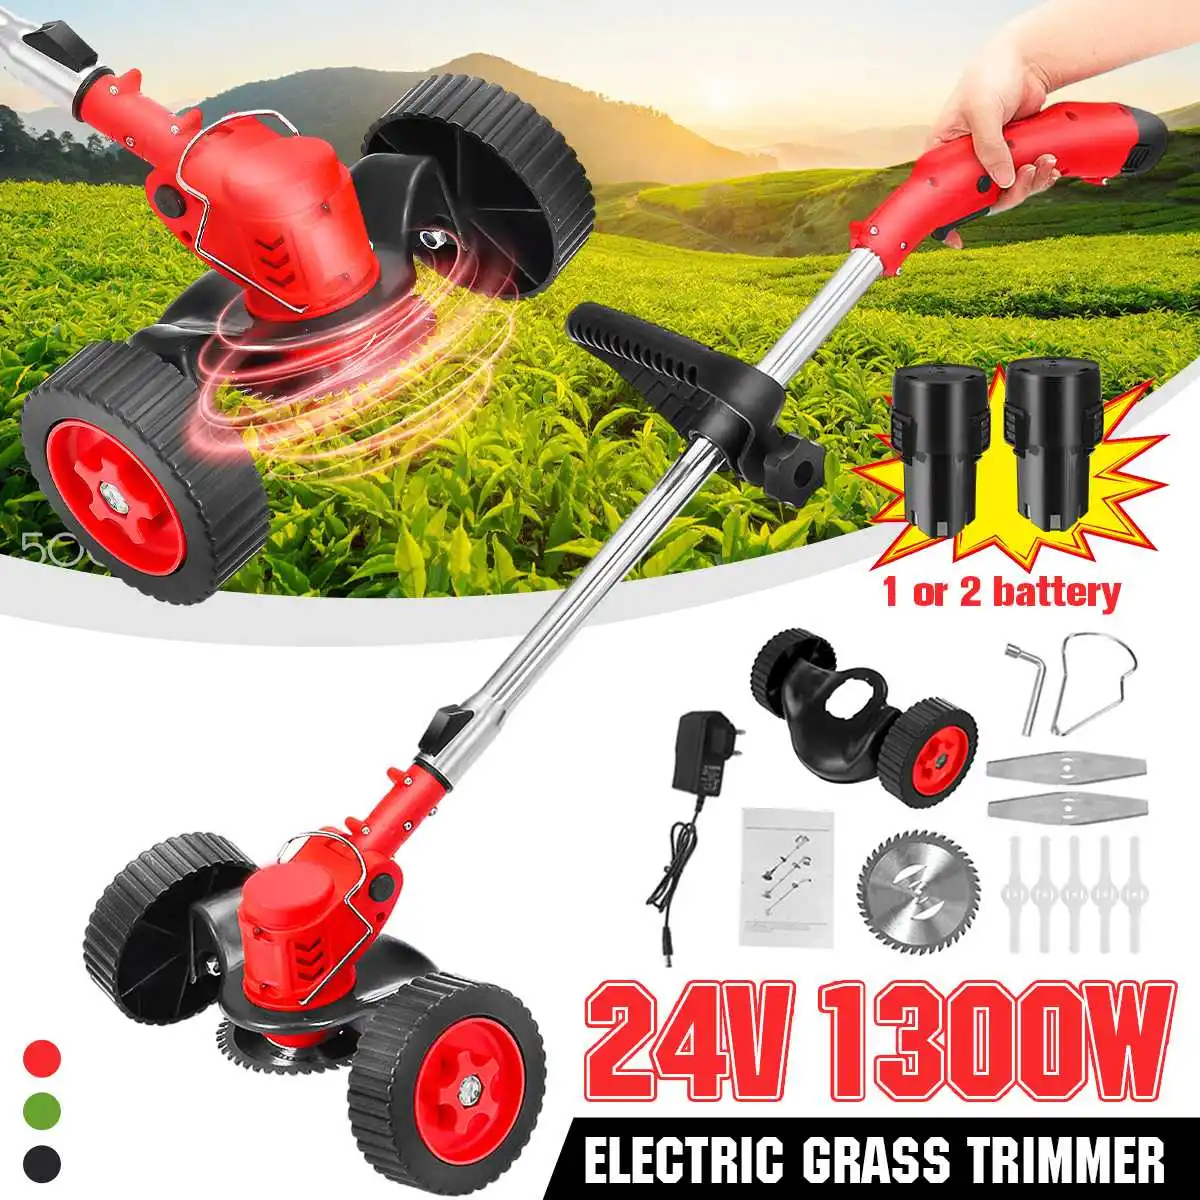 

1300W 24V Cordless Electric Grass Trimmer Lawn Mower Weeds Brush Length Adjustable Cutter Garden Tools With 1/2 7000mAh Battery